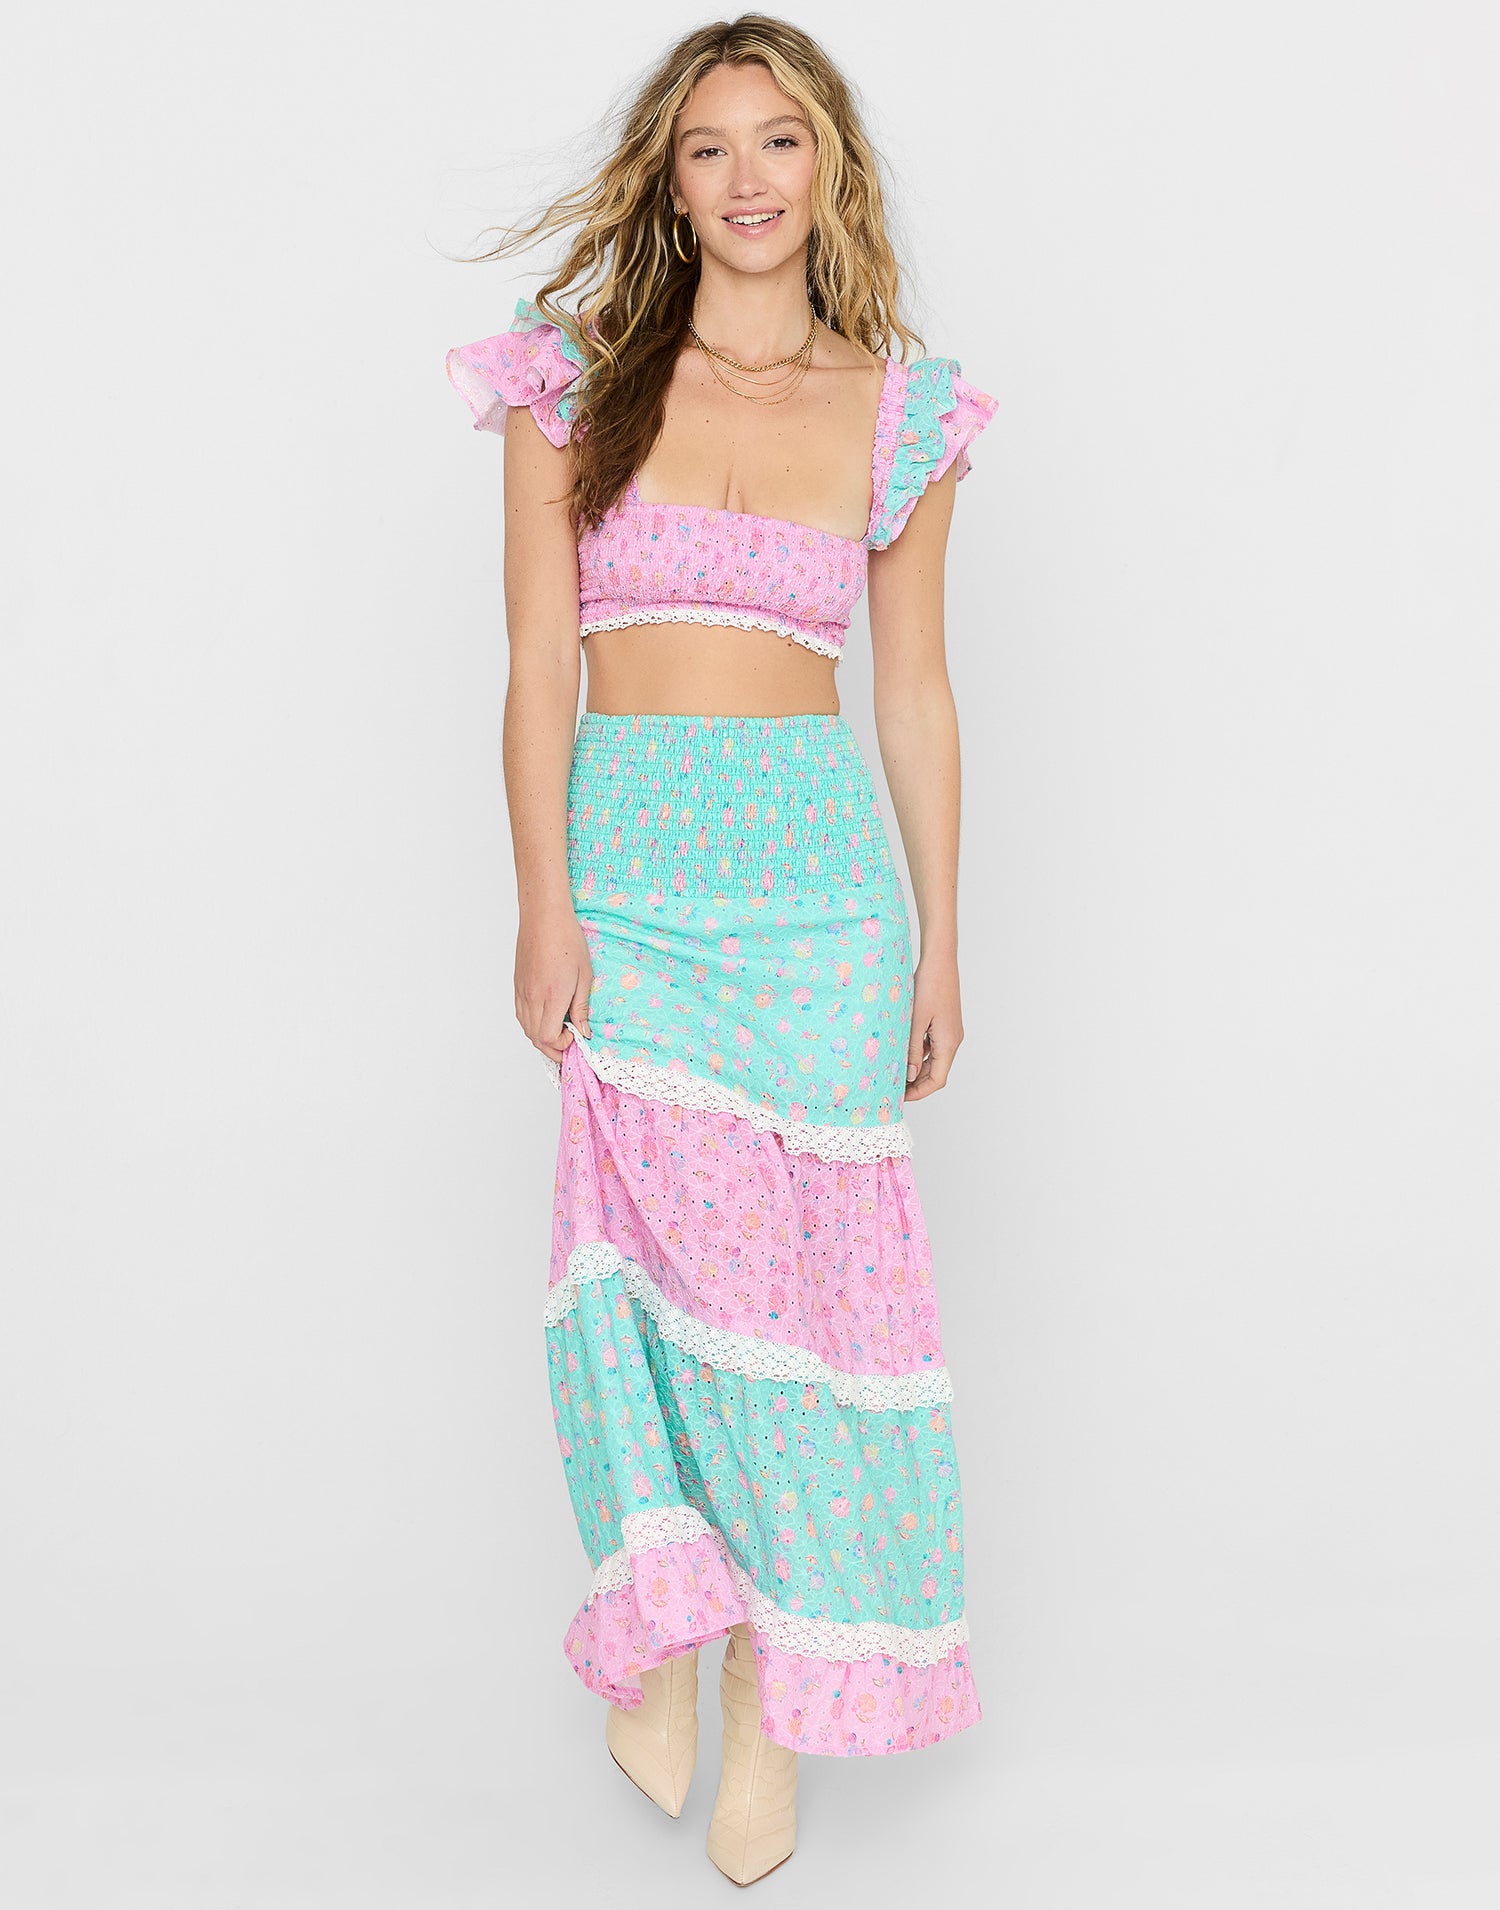 Everette Maxi Skirt in Pink Ditsy Shell with Smocked High Waistband & Crochet Trims - Front View